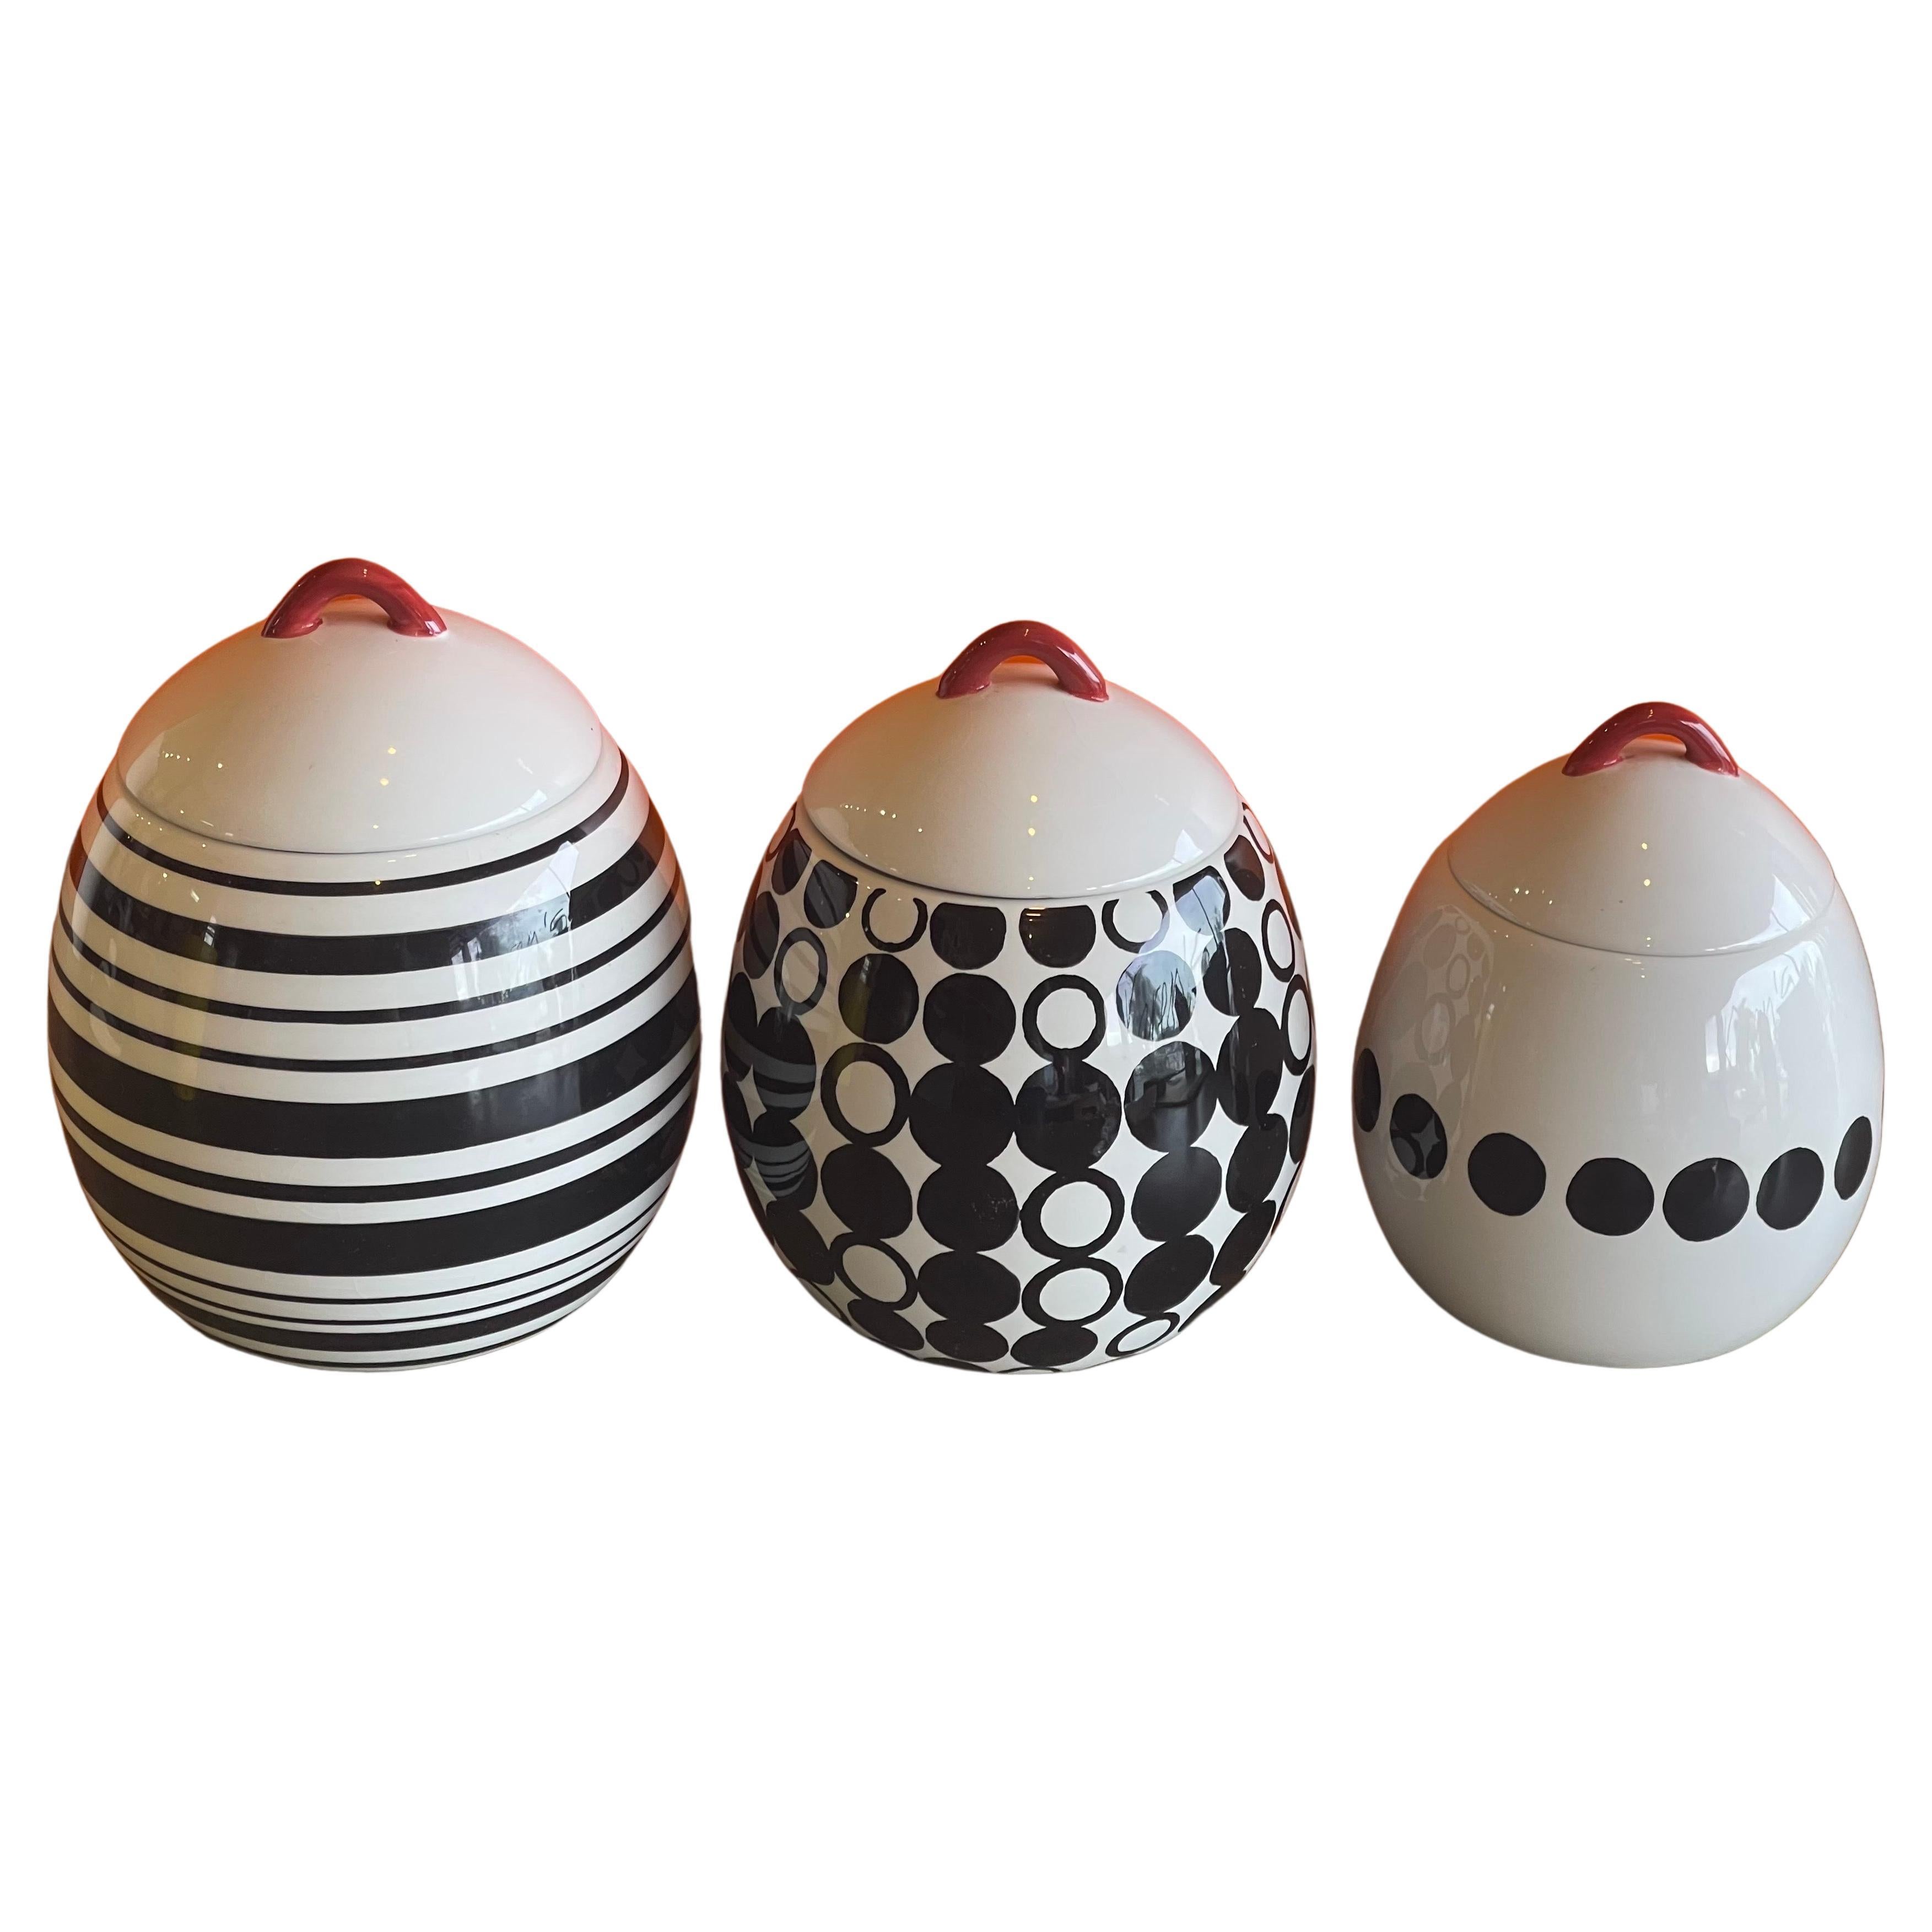 Set of three post-modern ceramic storage cannisters, circa 1990s. The cannisters are egg shaped with black and white geometric patterns and red handles on the removeable lids. The set is in good vintage condition and canisters measure: 6.5